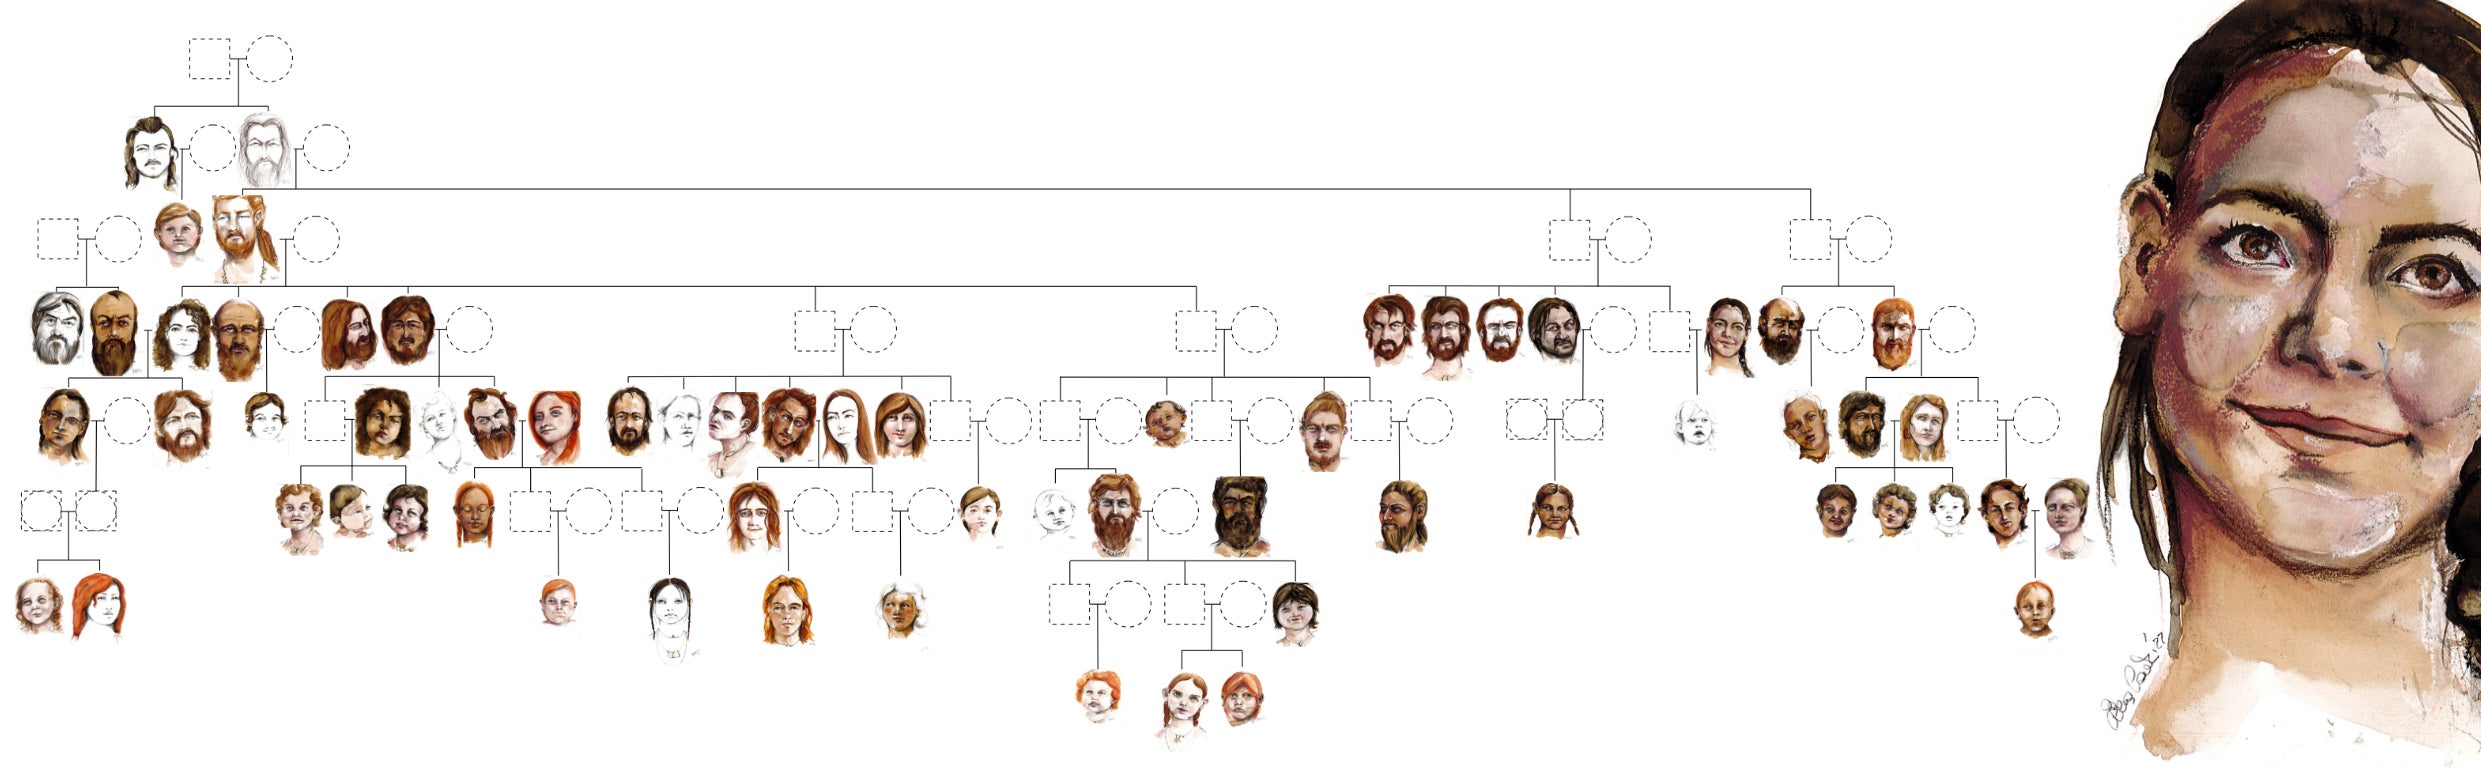 A family tree diagram includes portraits representing individuals from seven generations of one family